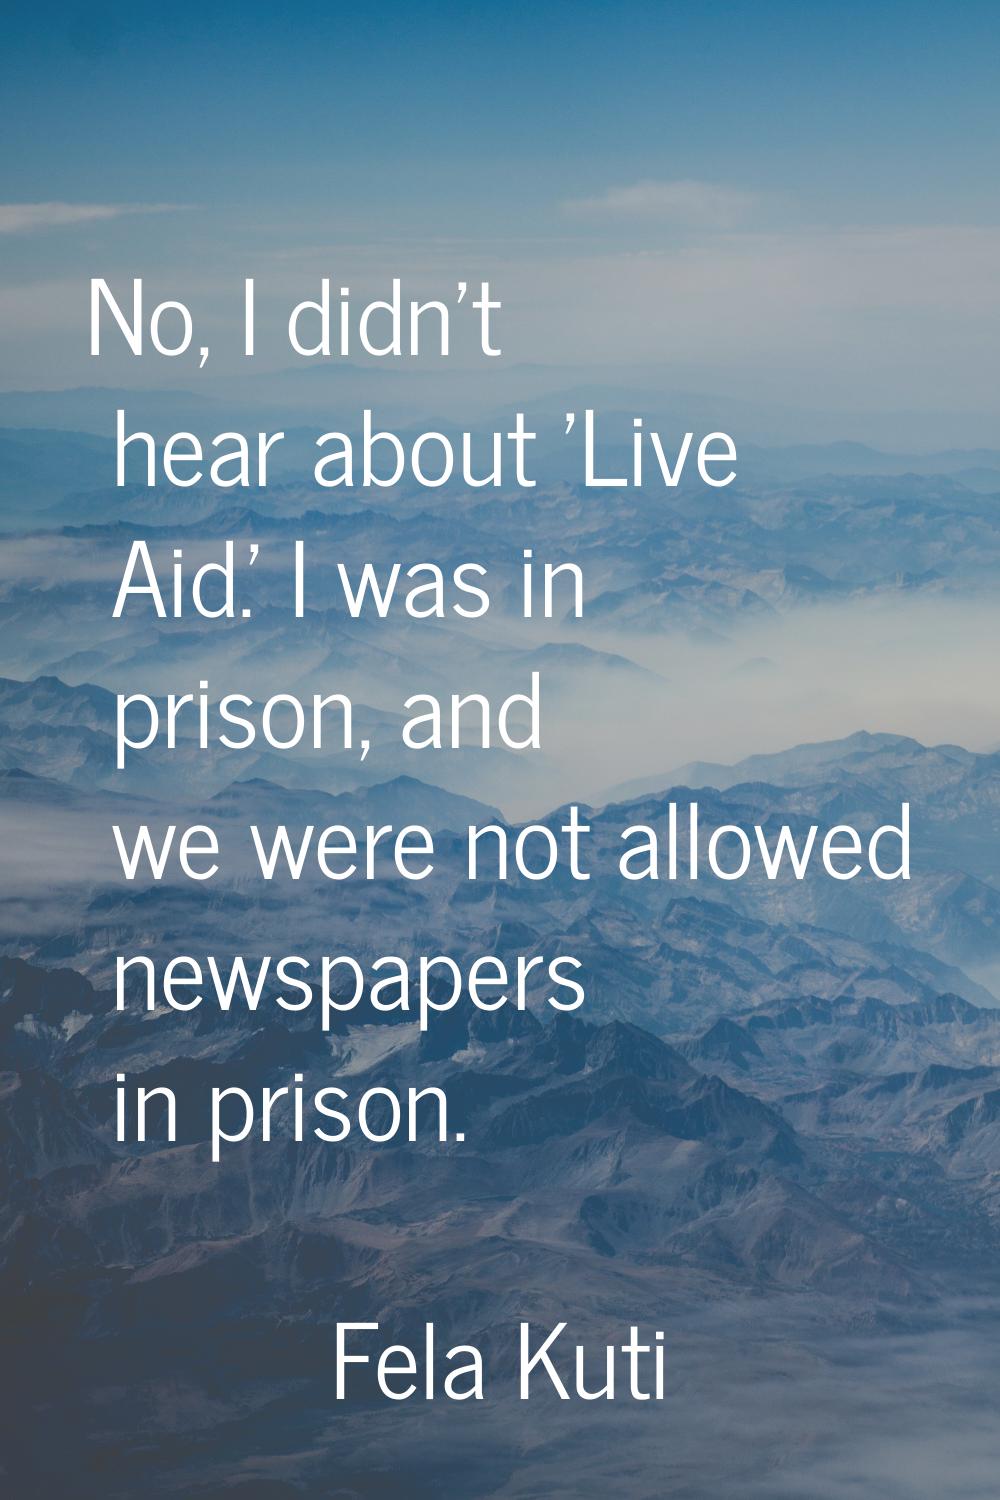 No, I didn't hear about 'Live Aid.' I was in prison, and we were not allowed newspapers in prison.